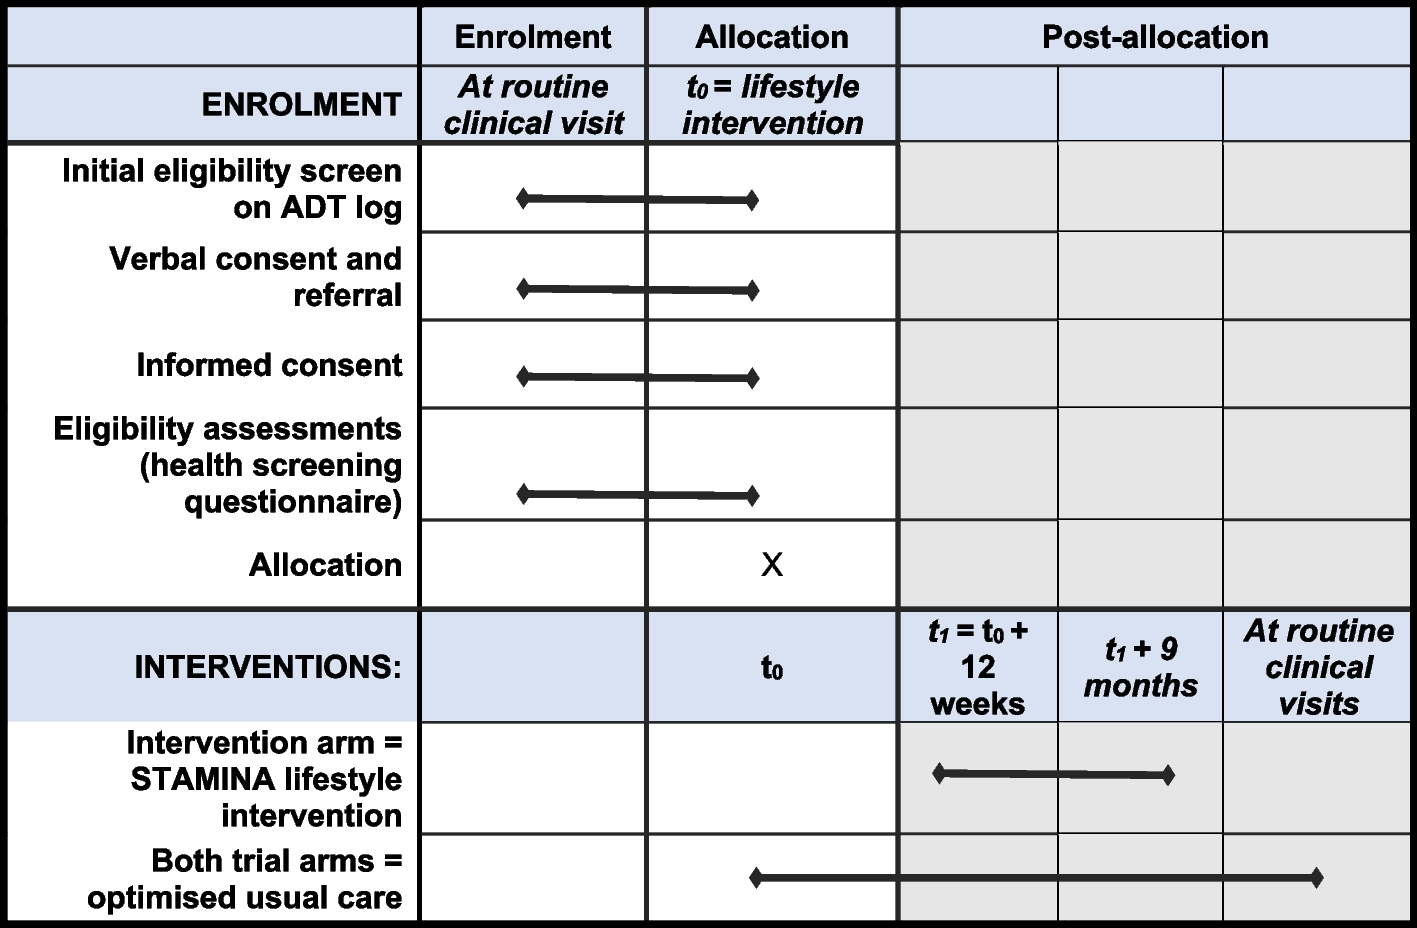 Supported exercise TrAining for Men wIth prostate caNcer on Androgen deprivation therapy (STAMINA): study protocol for a randomised controlled trial of the clinical and cost-effectiveness of the STAMINA lifestyle intervention compared with optimised usual care, including internal pilot and parallel process evaluation